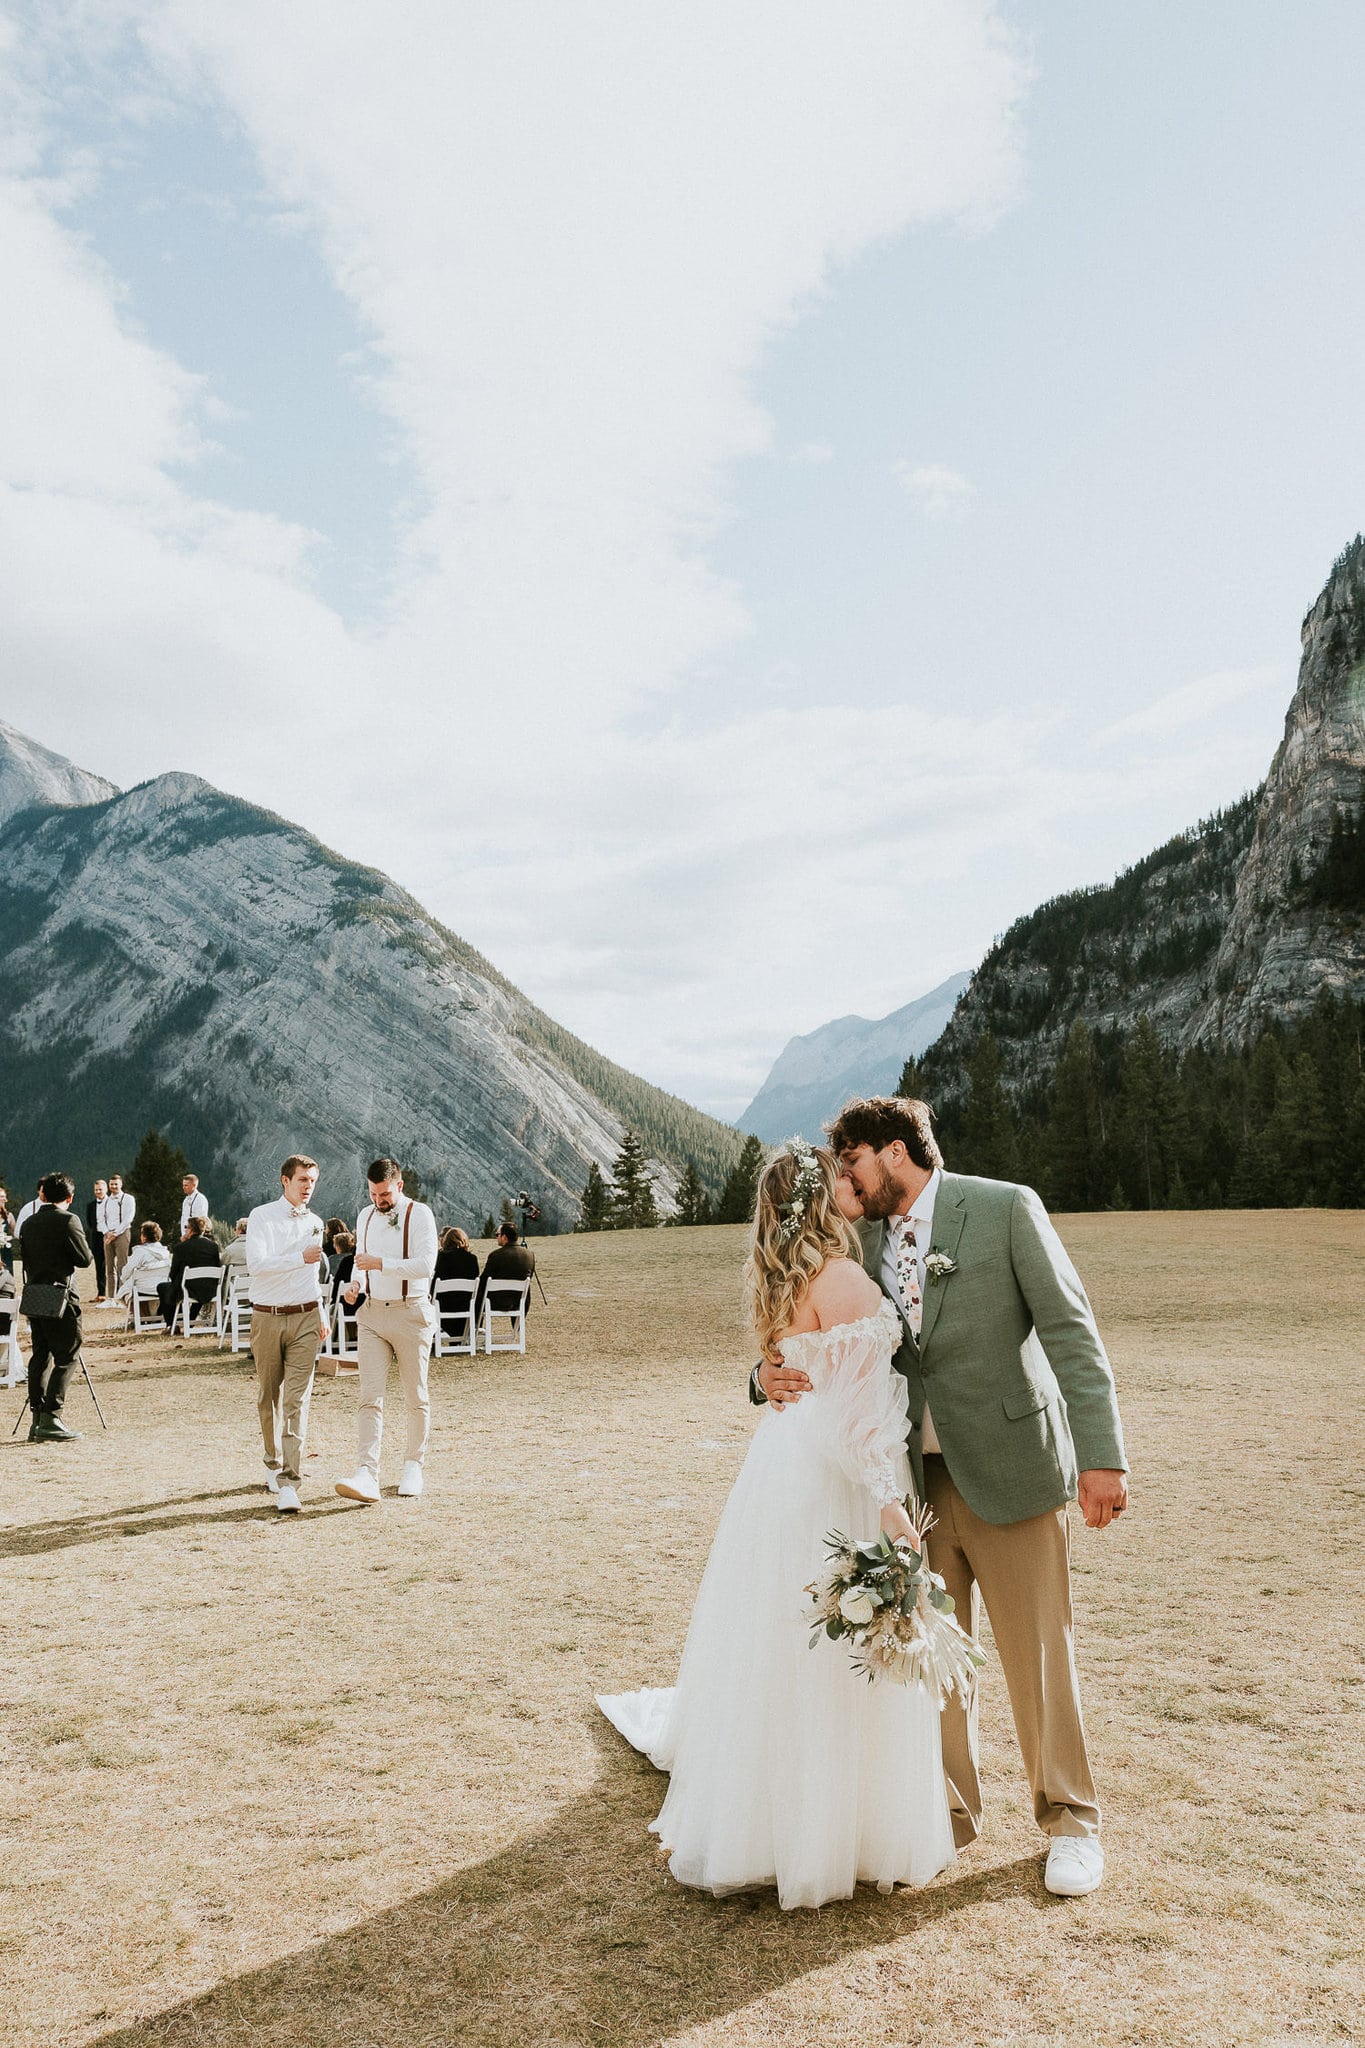 Bride and Groom walk down the aisle and stop for a kiss at their outdoor wedding in Banff